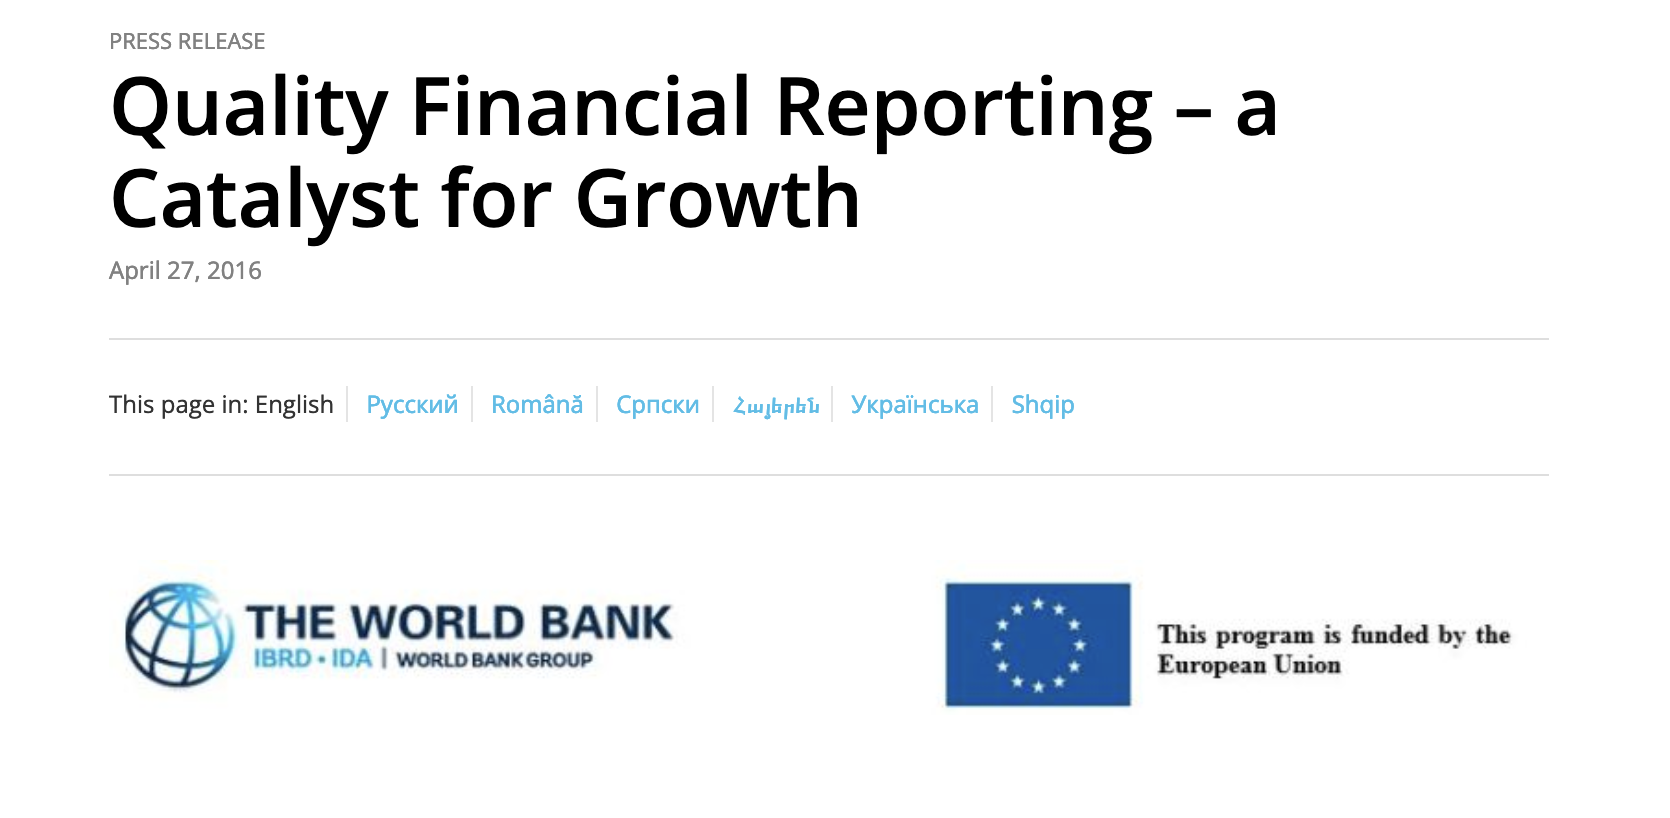 Quality Financial Reporting – a Catalyst for Growth